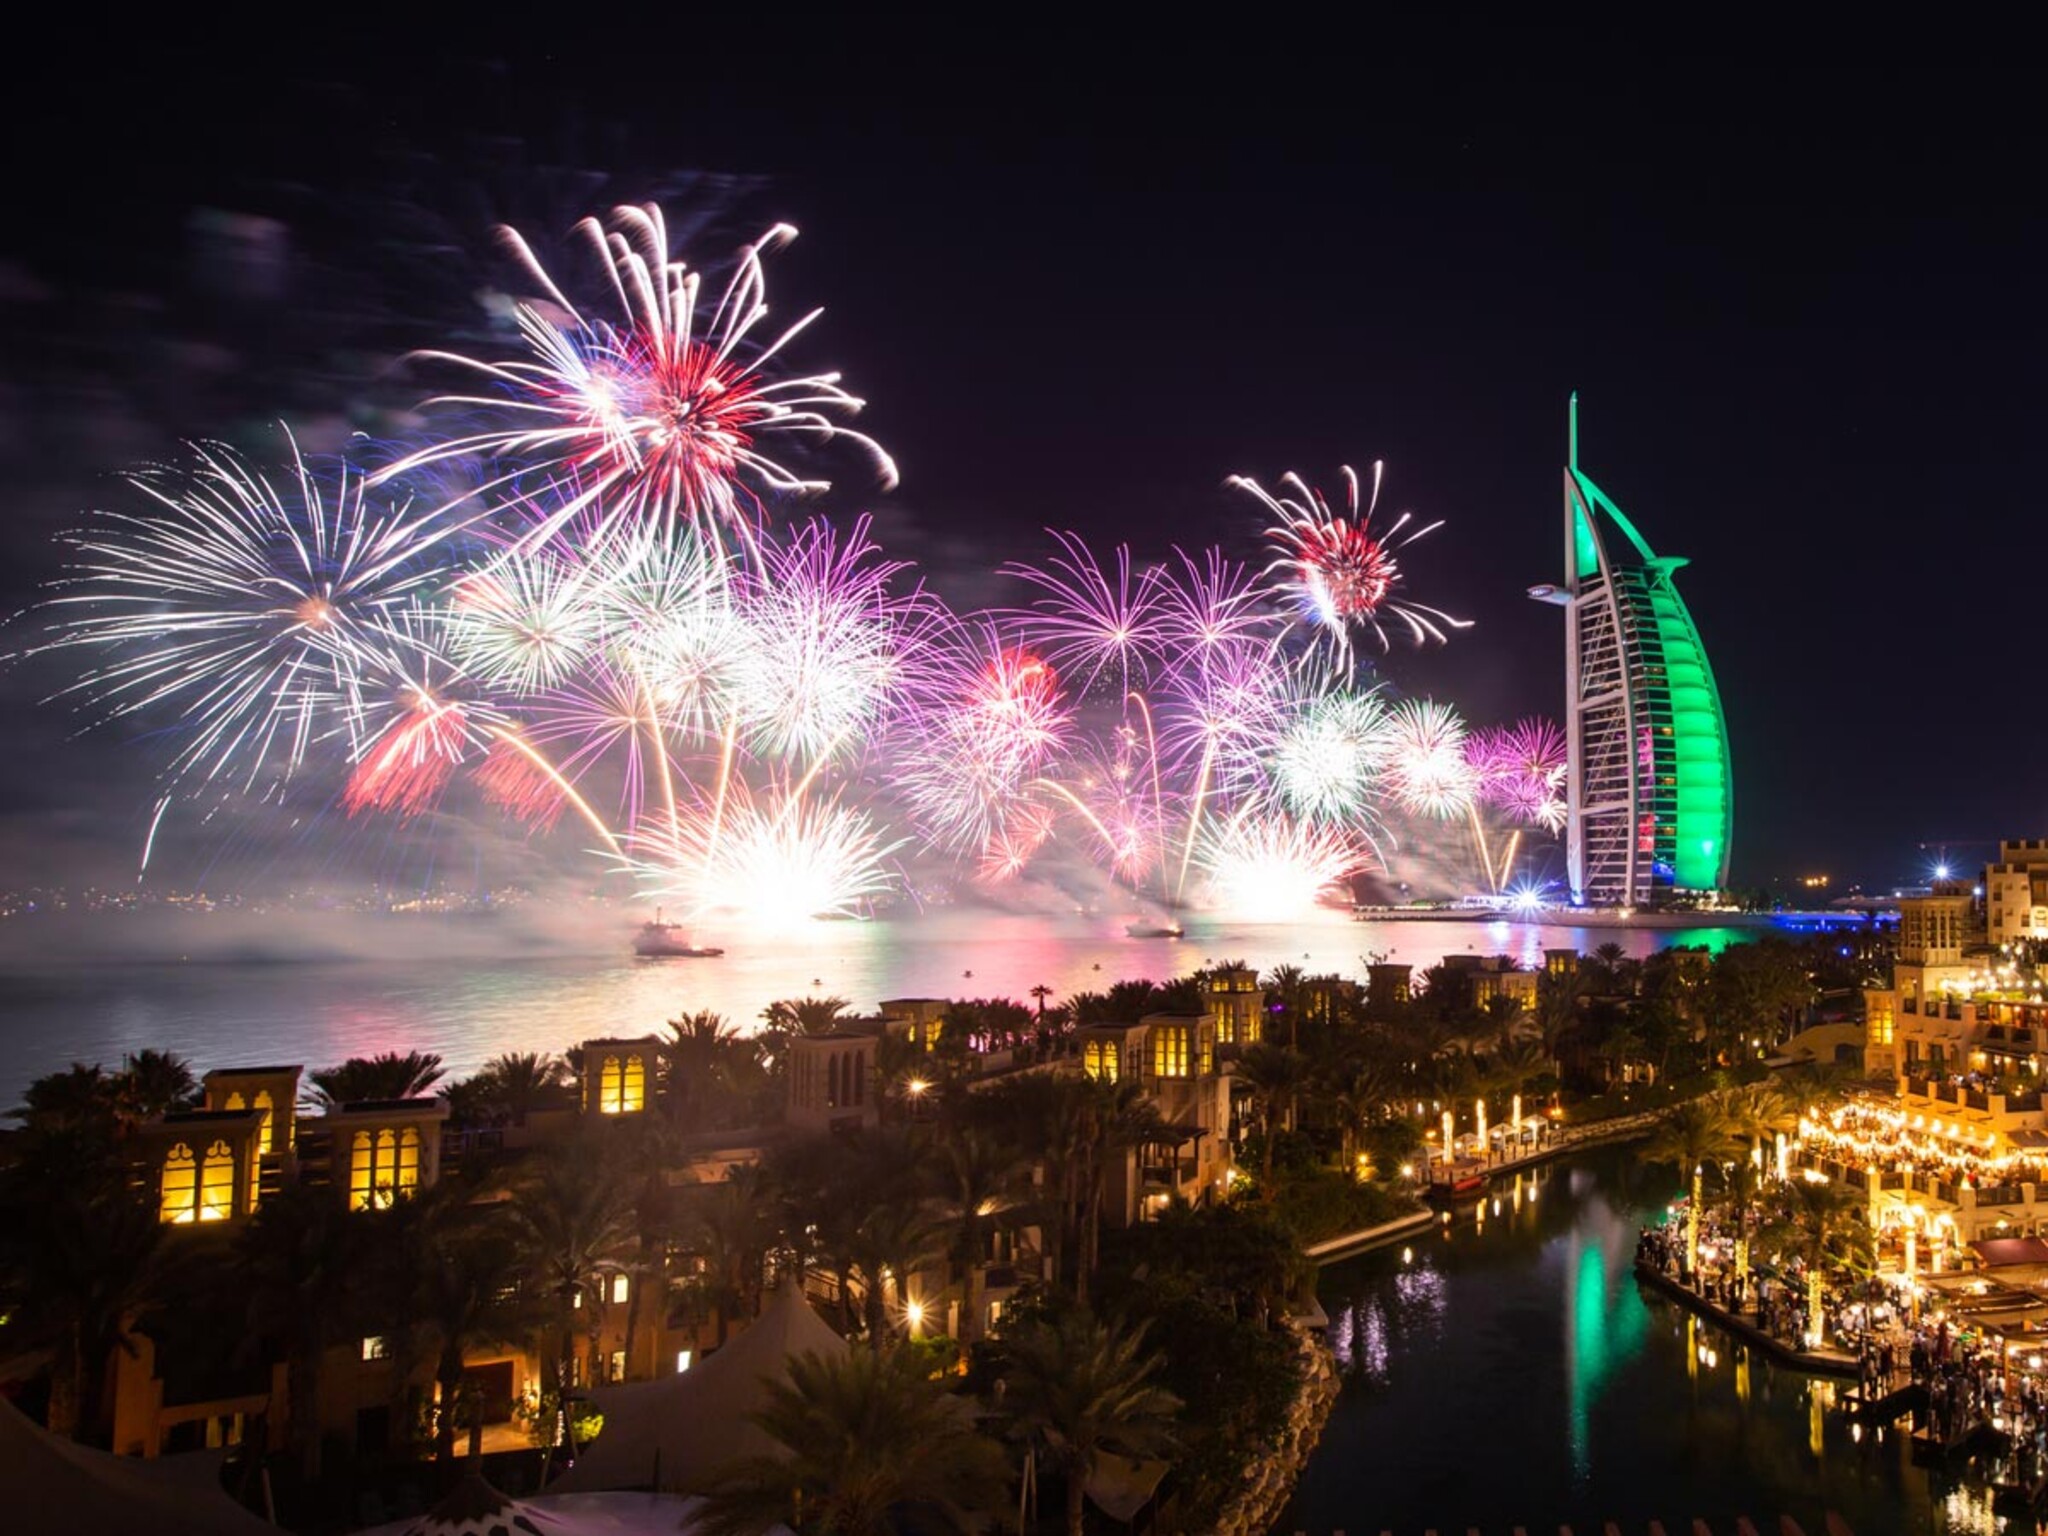 The UAE announced the employees’ holidays on the occasion of Eid al-Adha